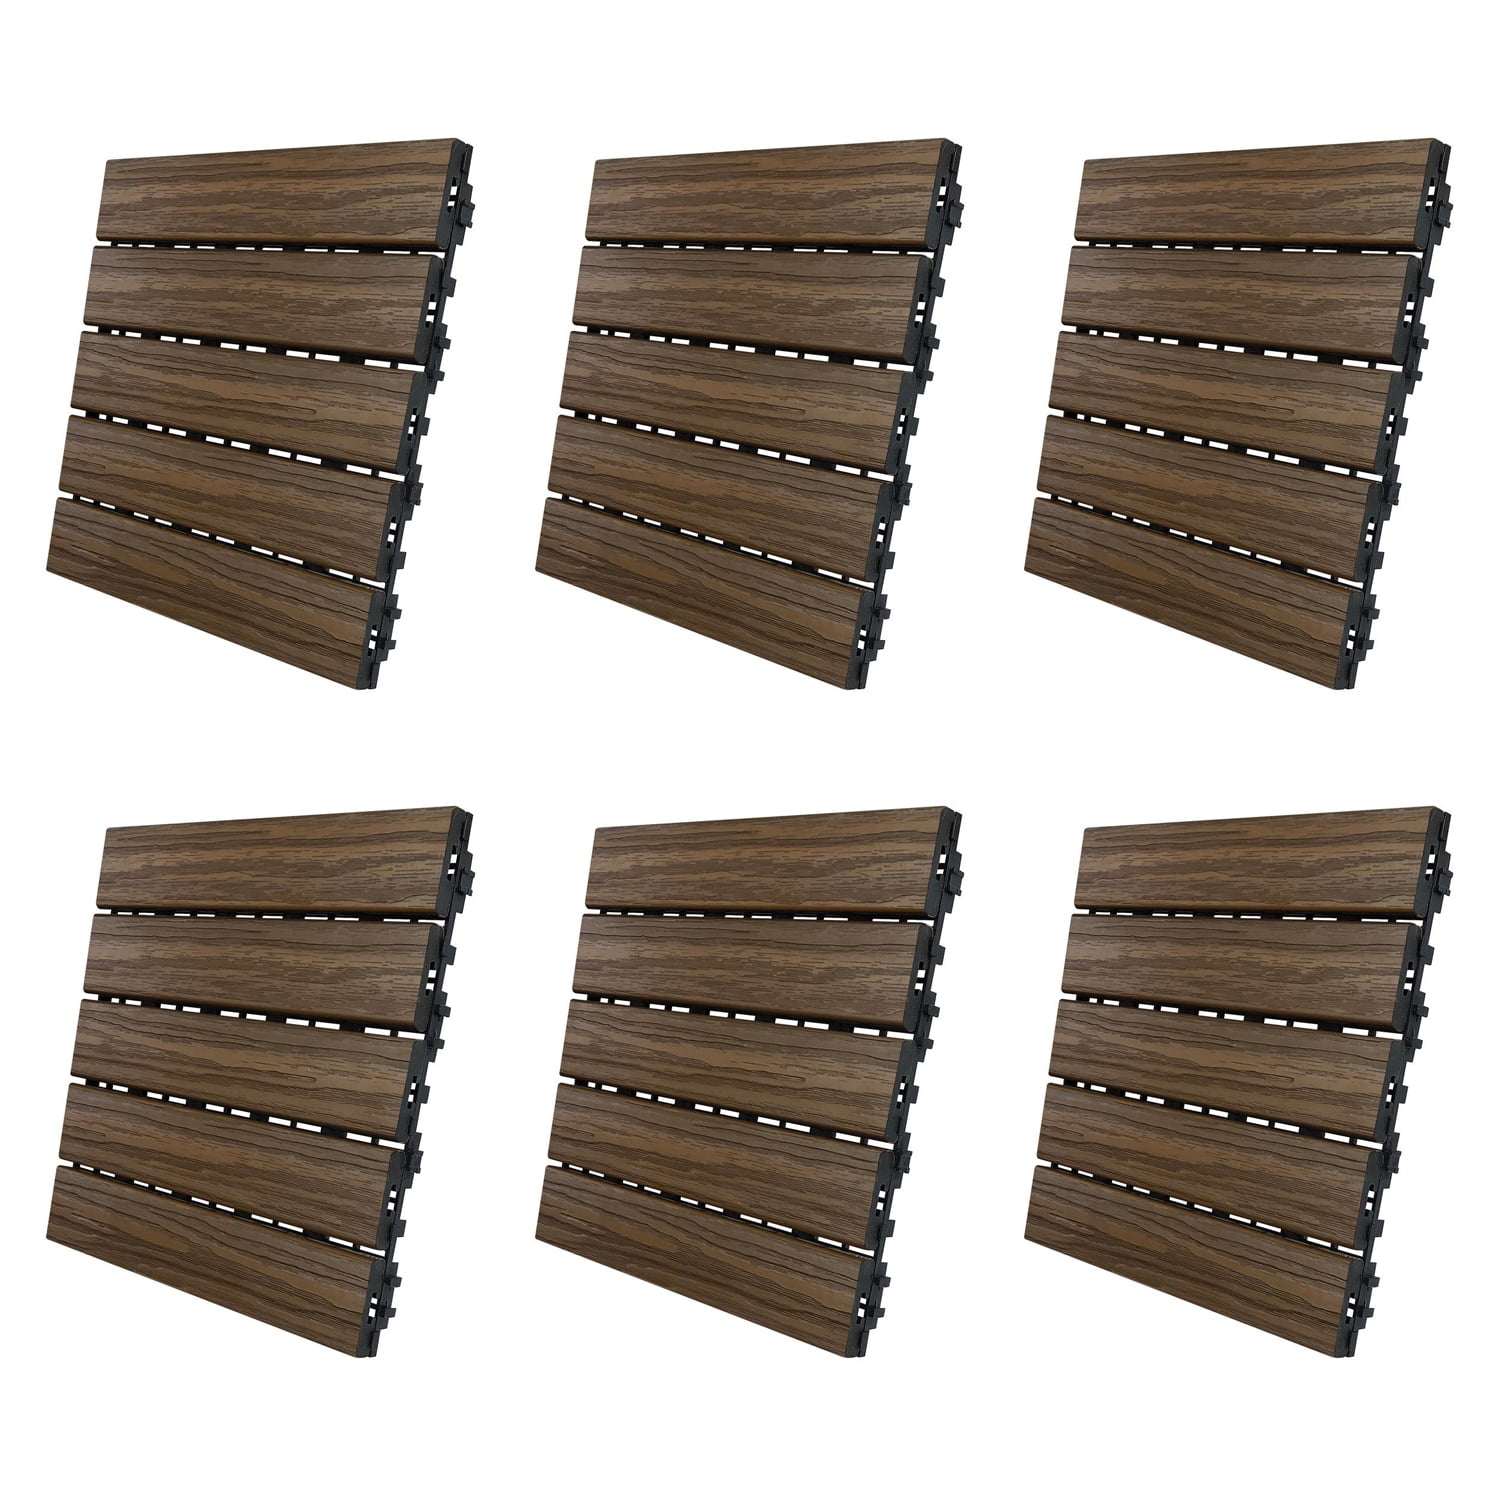 5011914 6 Sq. Ft. 12 X 12 In. Walnut Composite Balcony & Deck Tiles - Pack Of 6